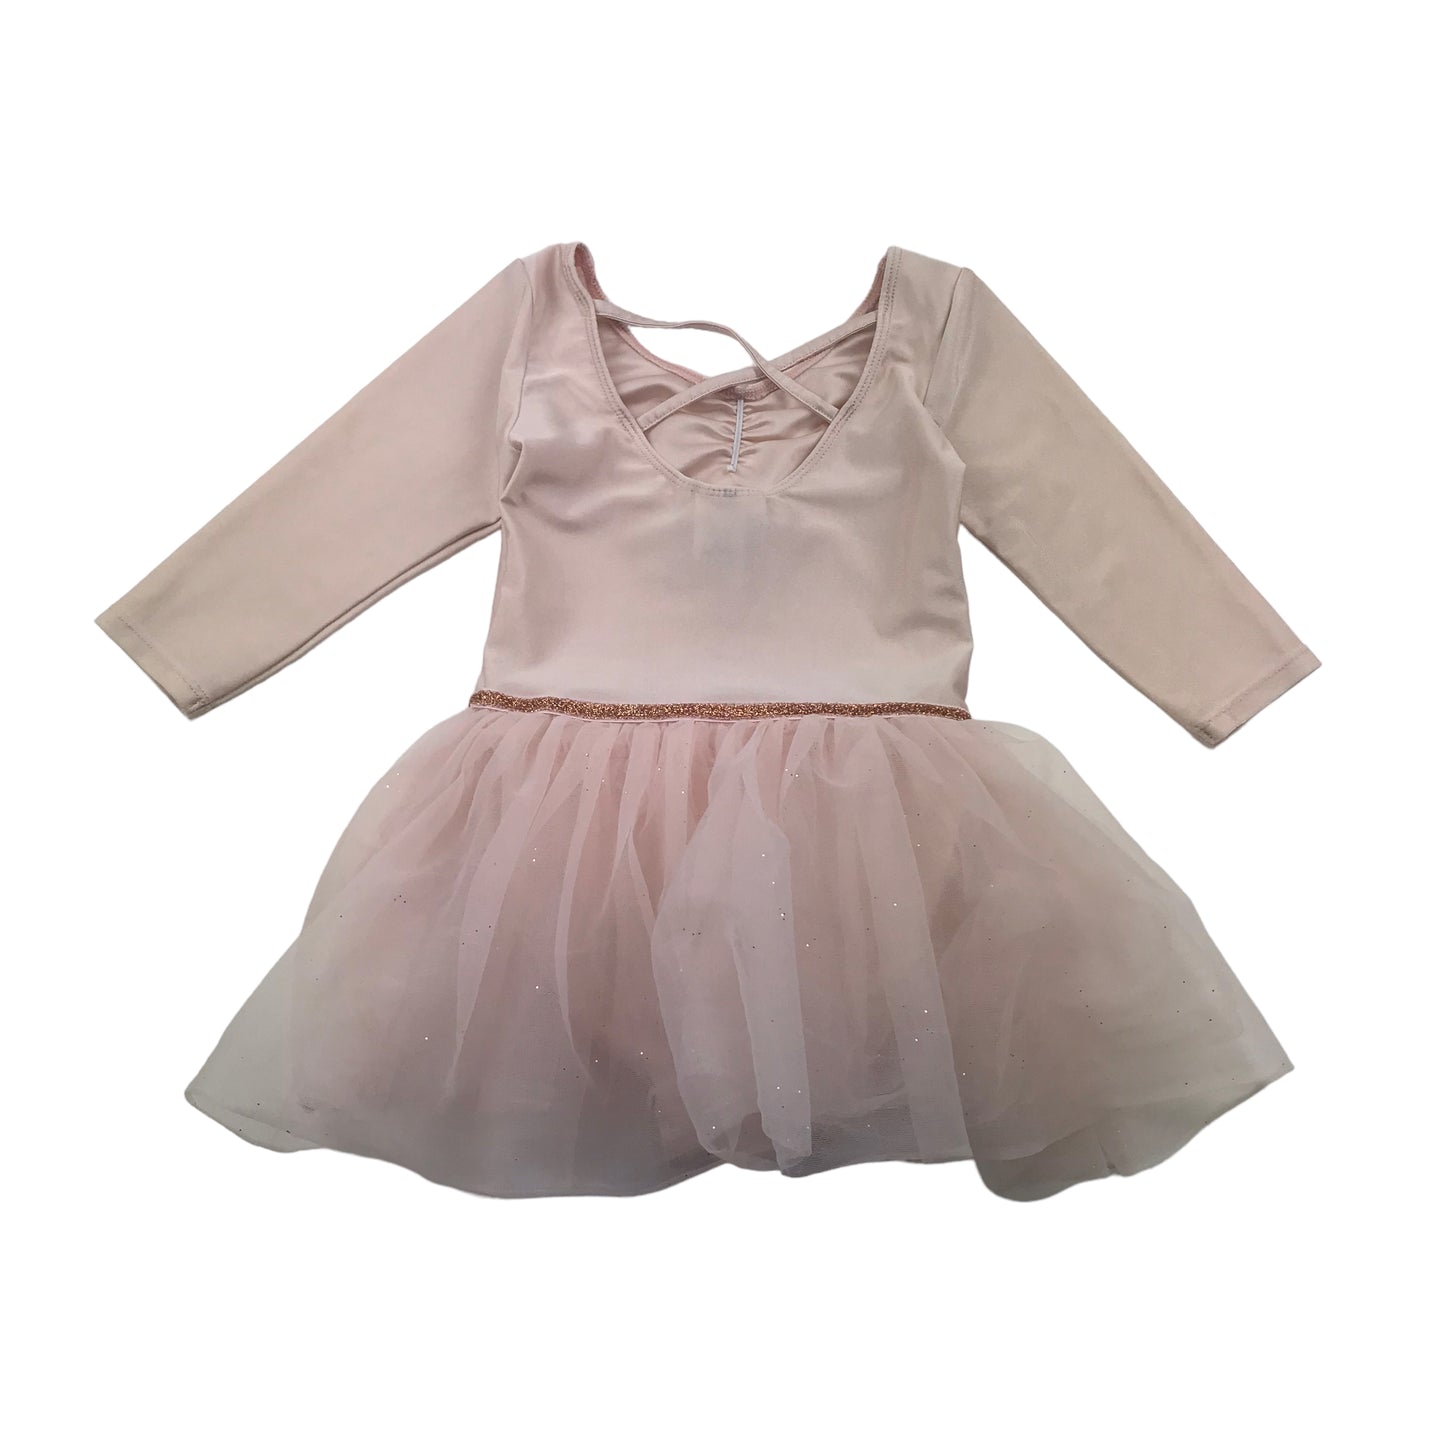 H&M Pink Long Sleeve Leotard with tutu Age 5